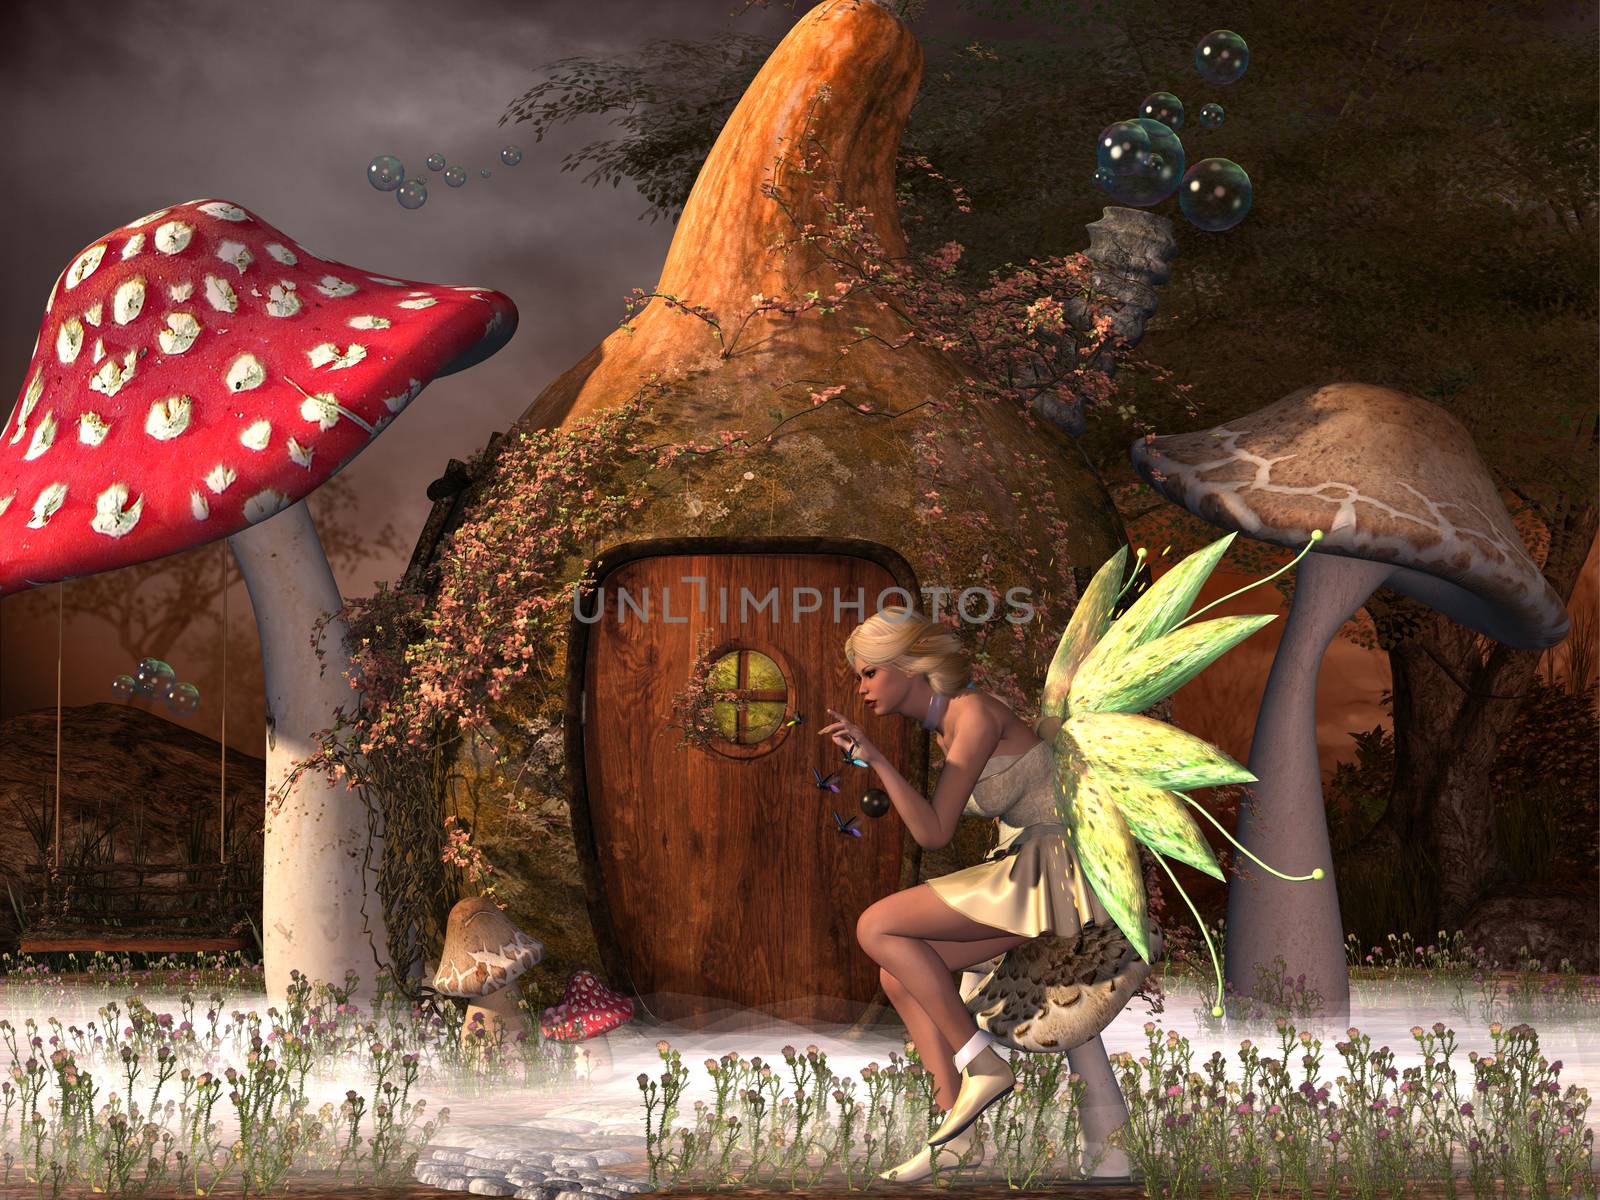 Fairy Belle plays with glowflies outside her gourd home in the magical forest.